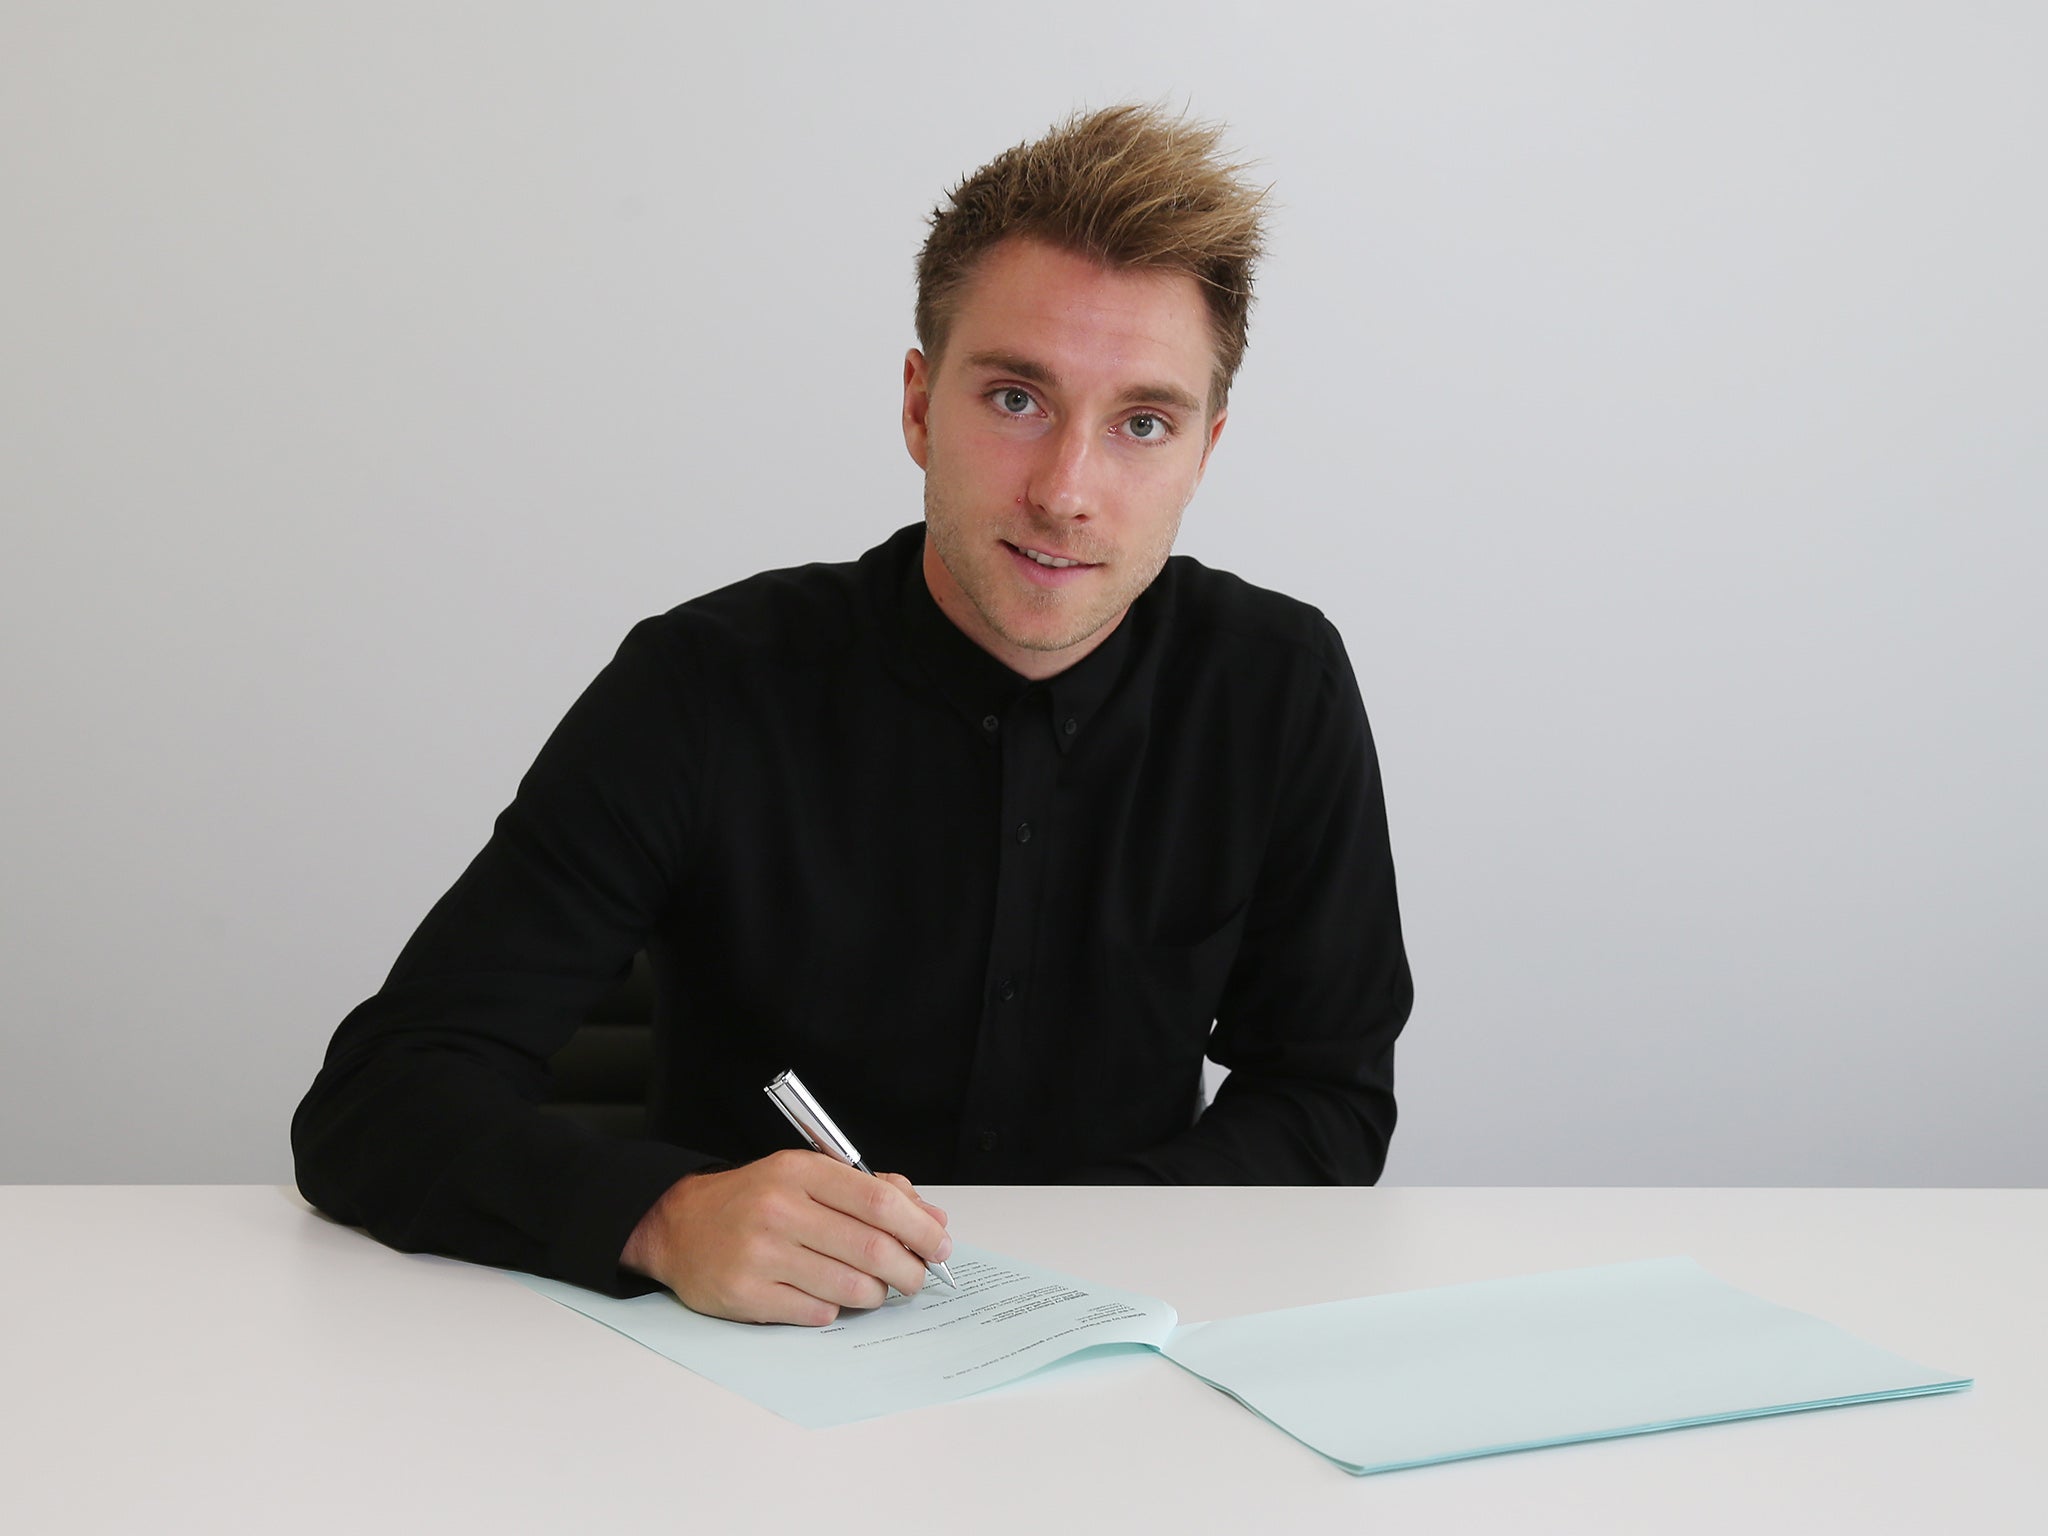 Christian Eriksen signs a new four-year contract at Tottenham